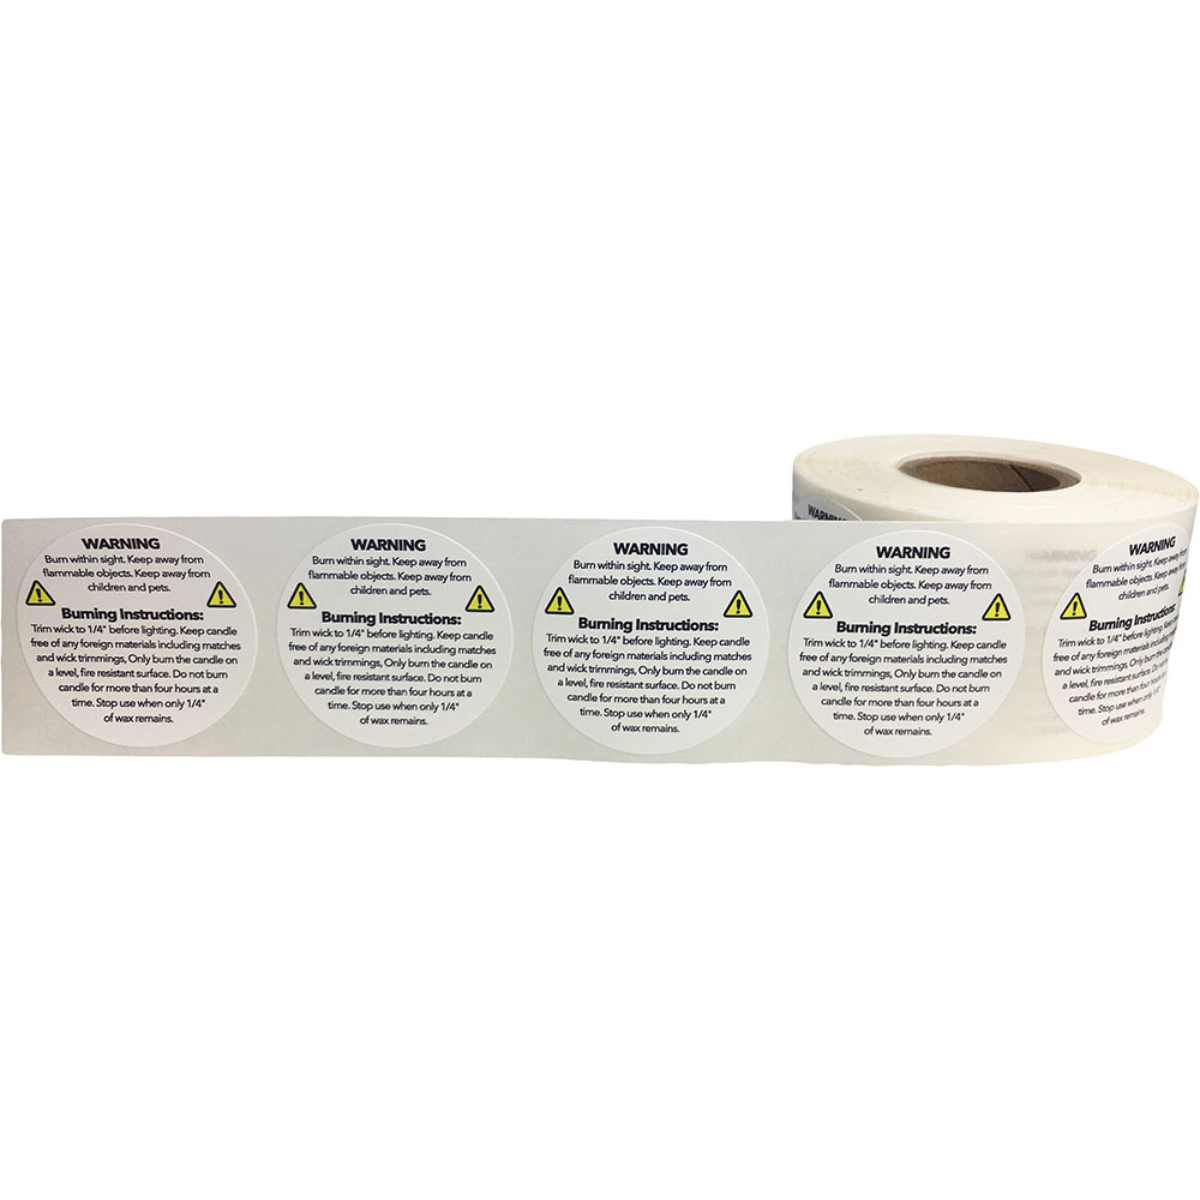 28mm White Candle Safety Label